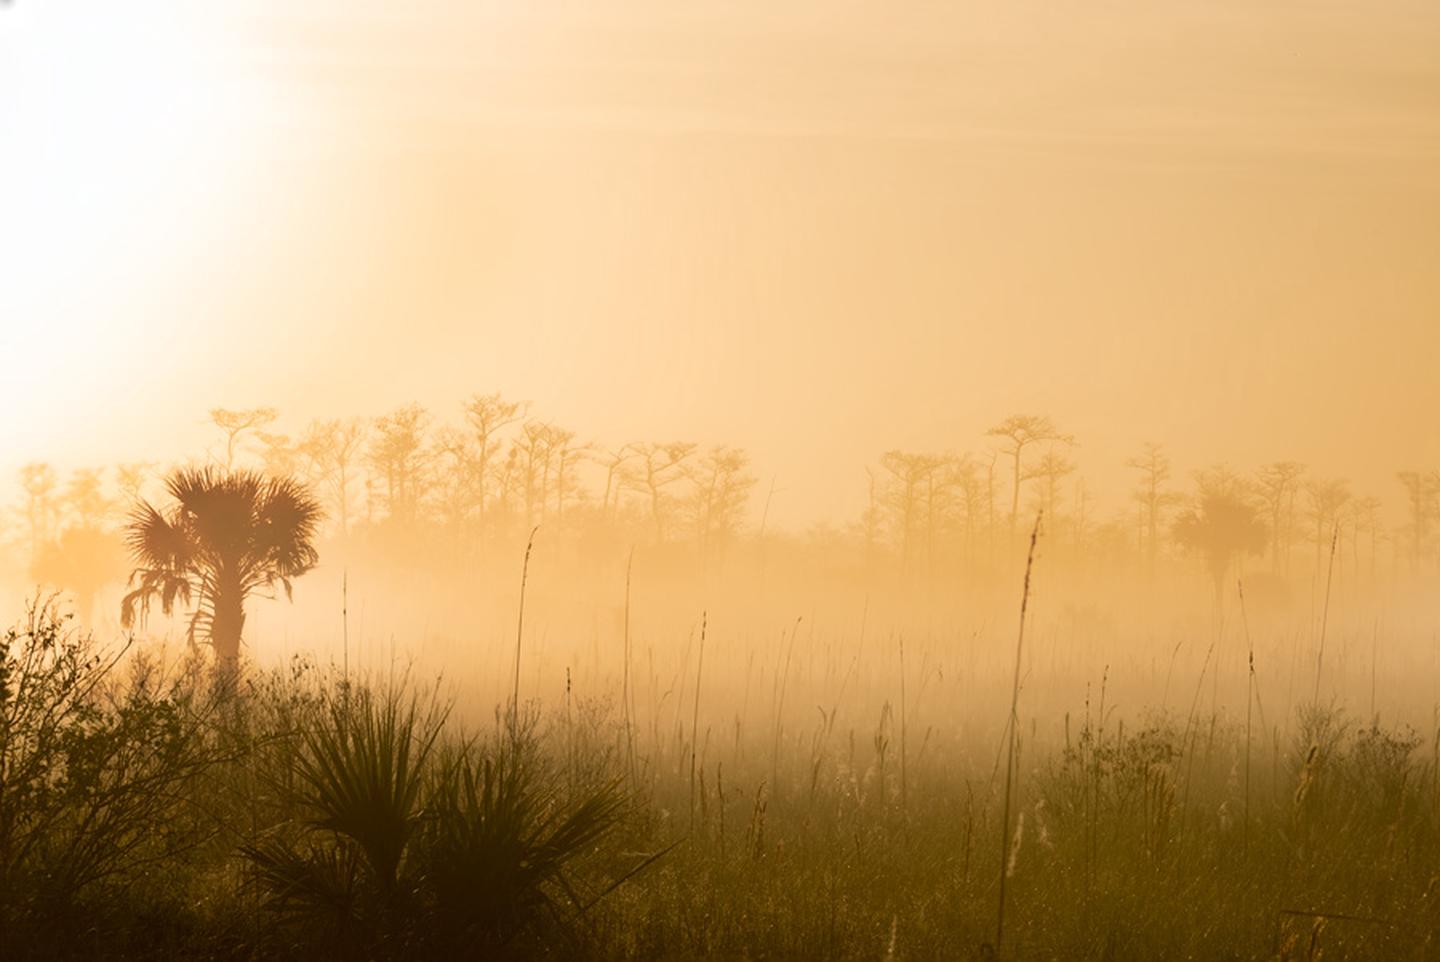 Preview photo of Big Cypress National Preserve